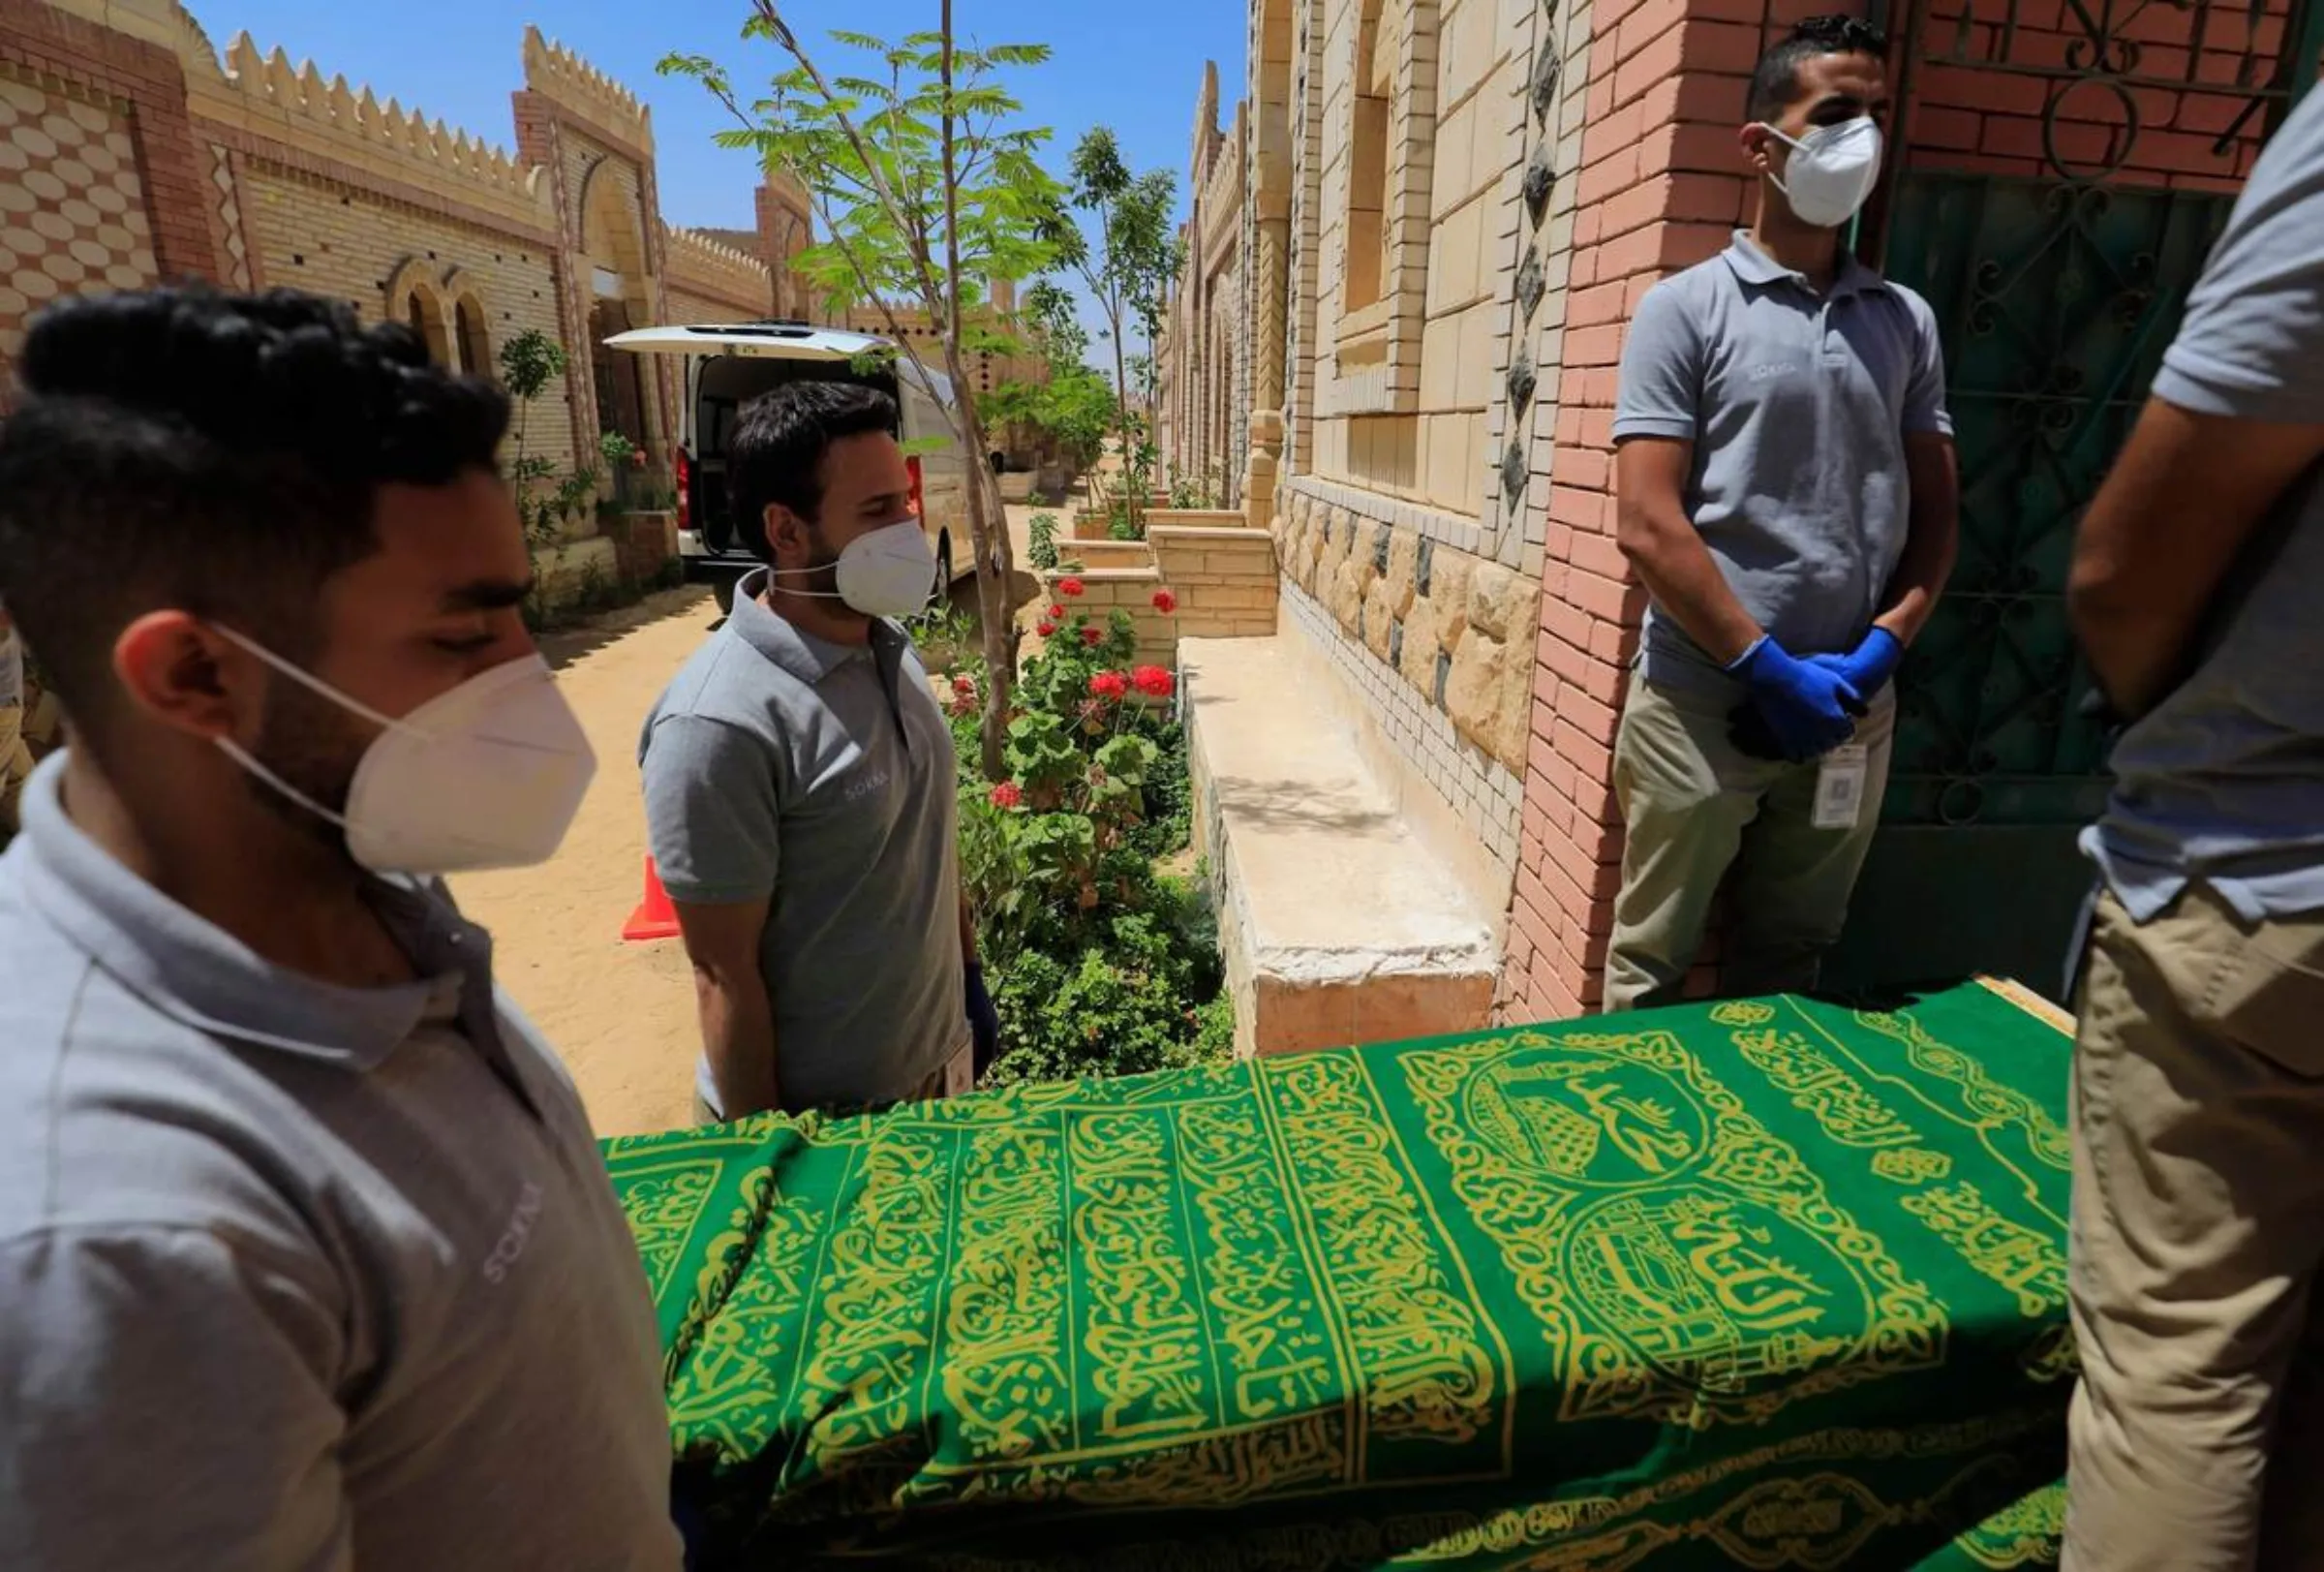 SOKNA team carry a coffin draped in a green prayer cloth into a funeral ceremony in Cairo, Egypt. May 19, 2021. Thomson Reuters Foundation/SOKNA